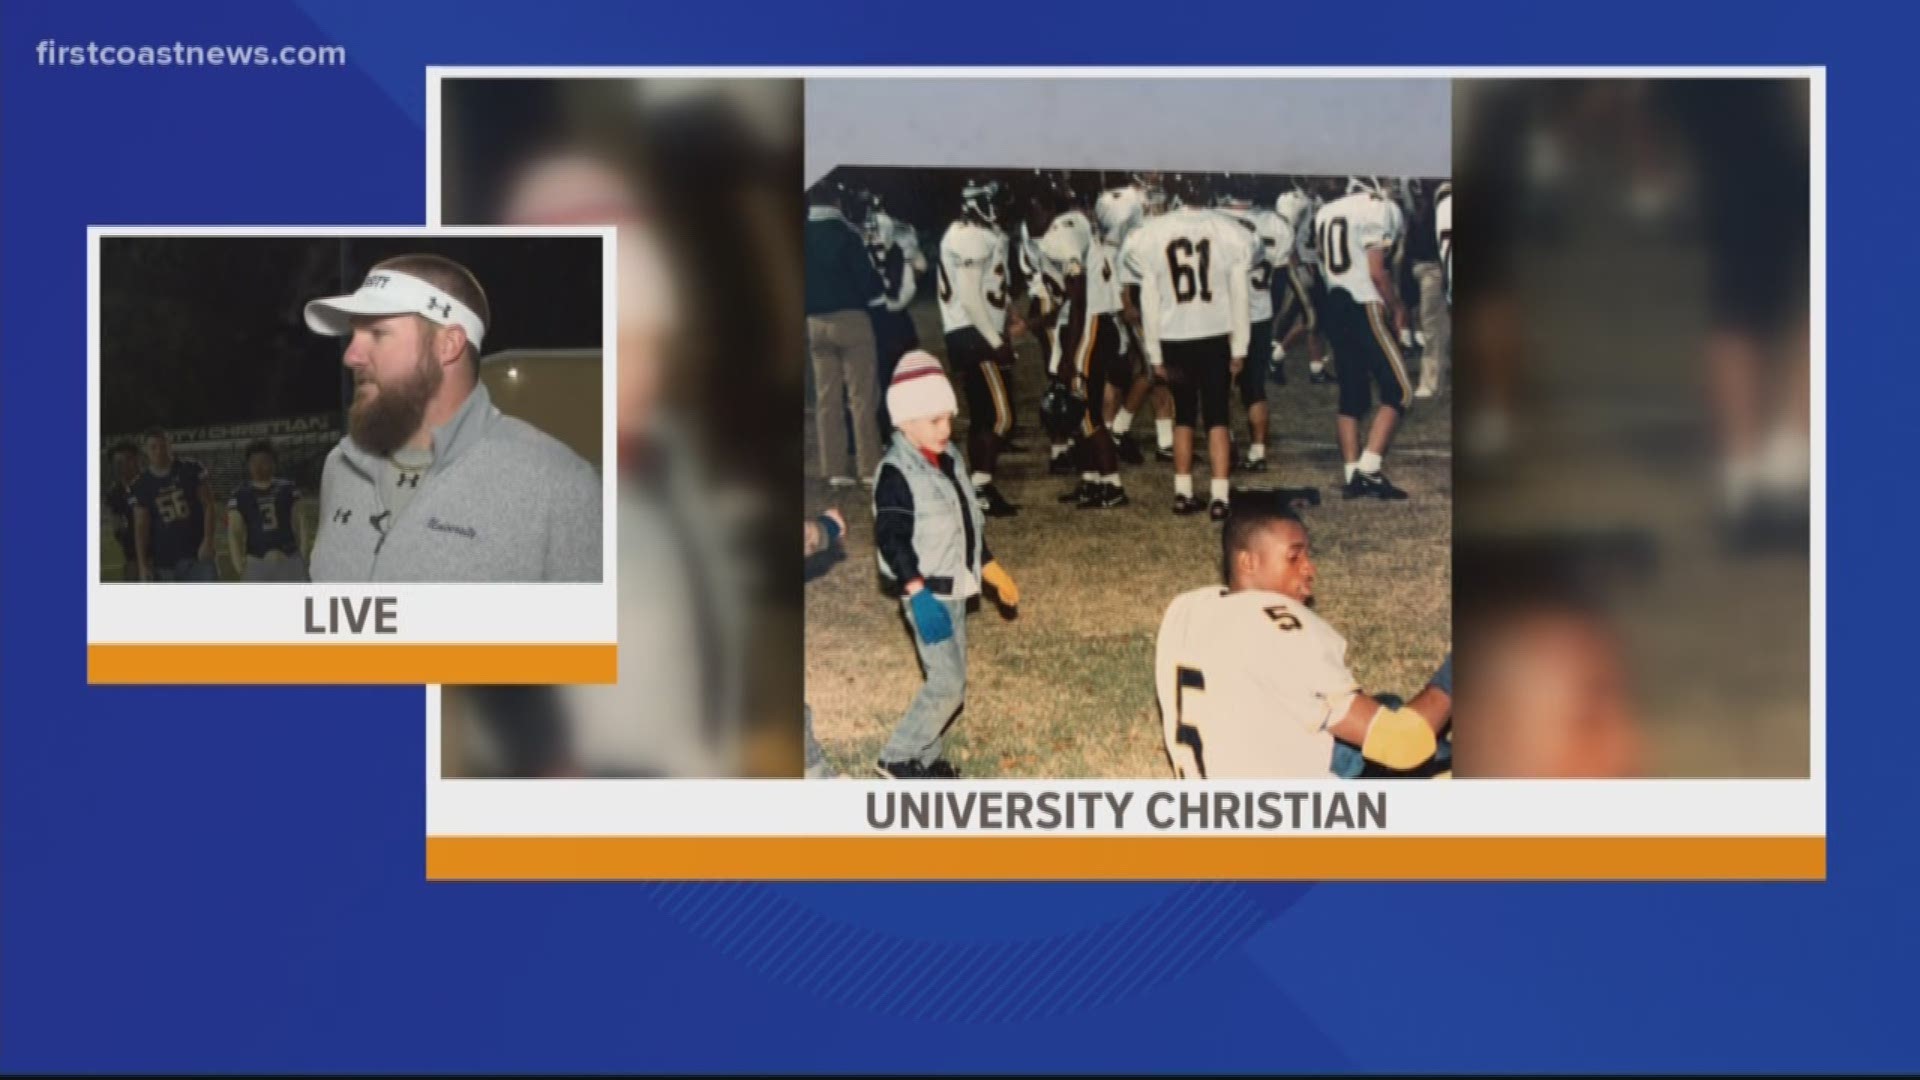 University Christian is taking on Bishop Kenny Friday night at 7:30 p.m.